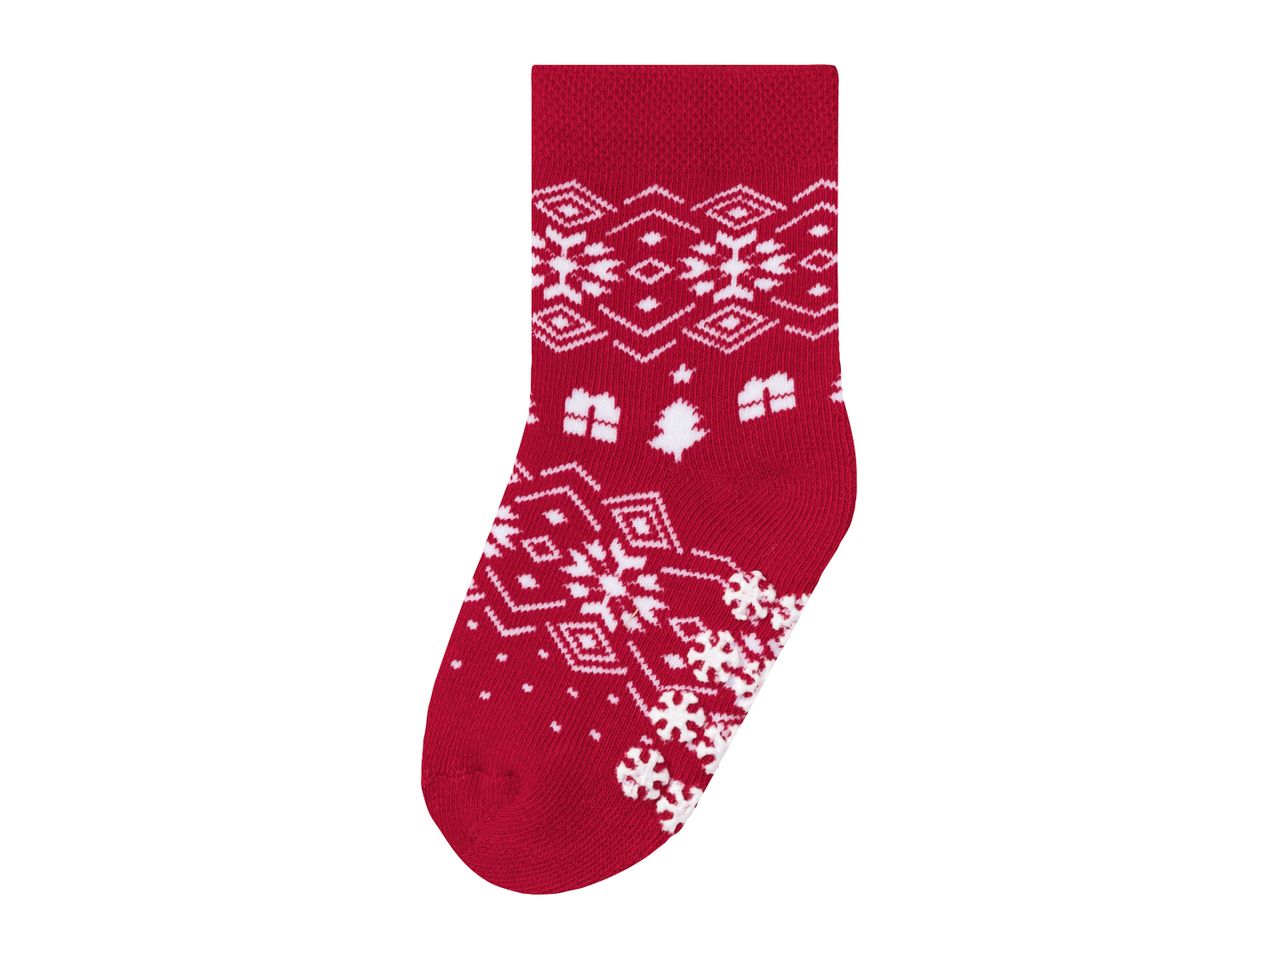 Go to full screen view: Lupilu Younger Kids’ Christmas Thermal Socks - 2 pairs - Image 7